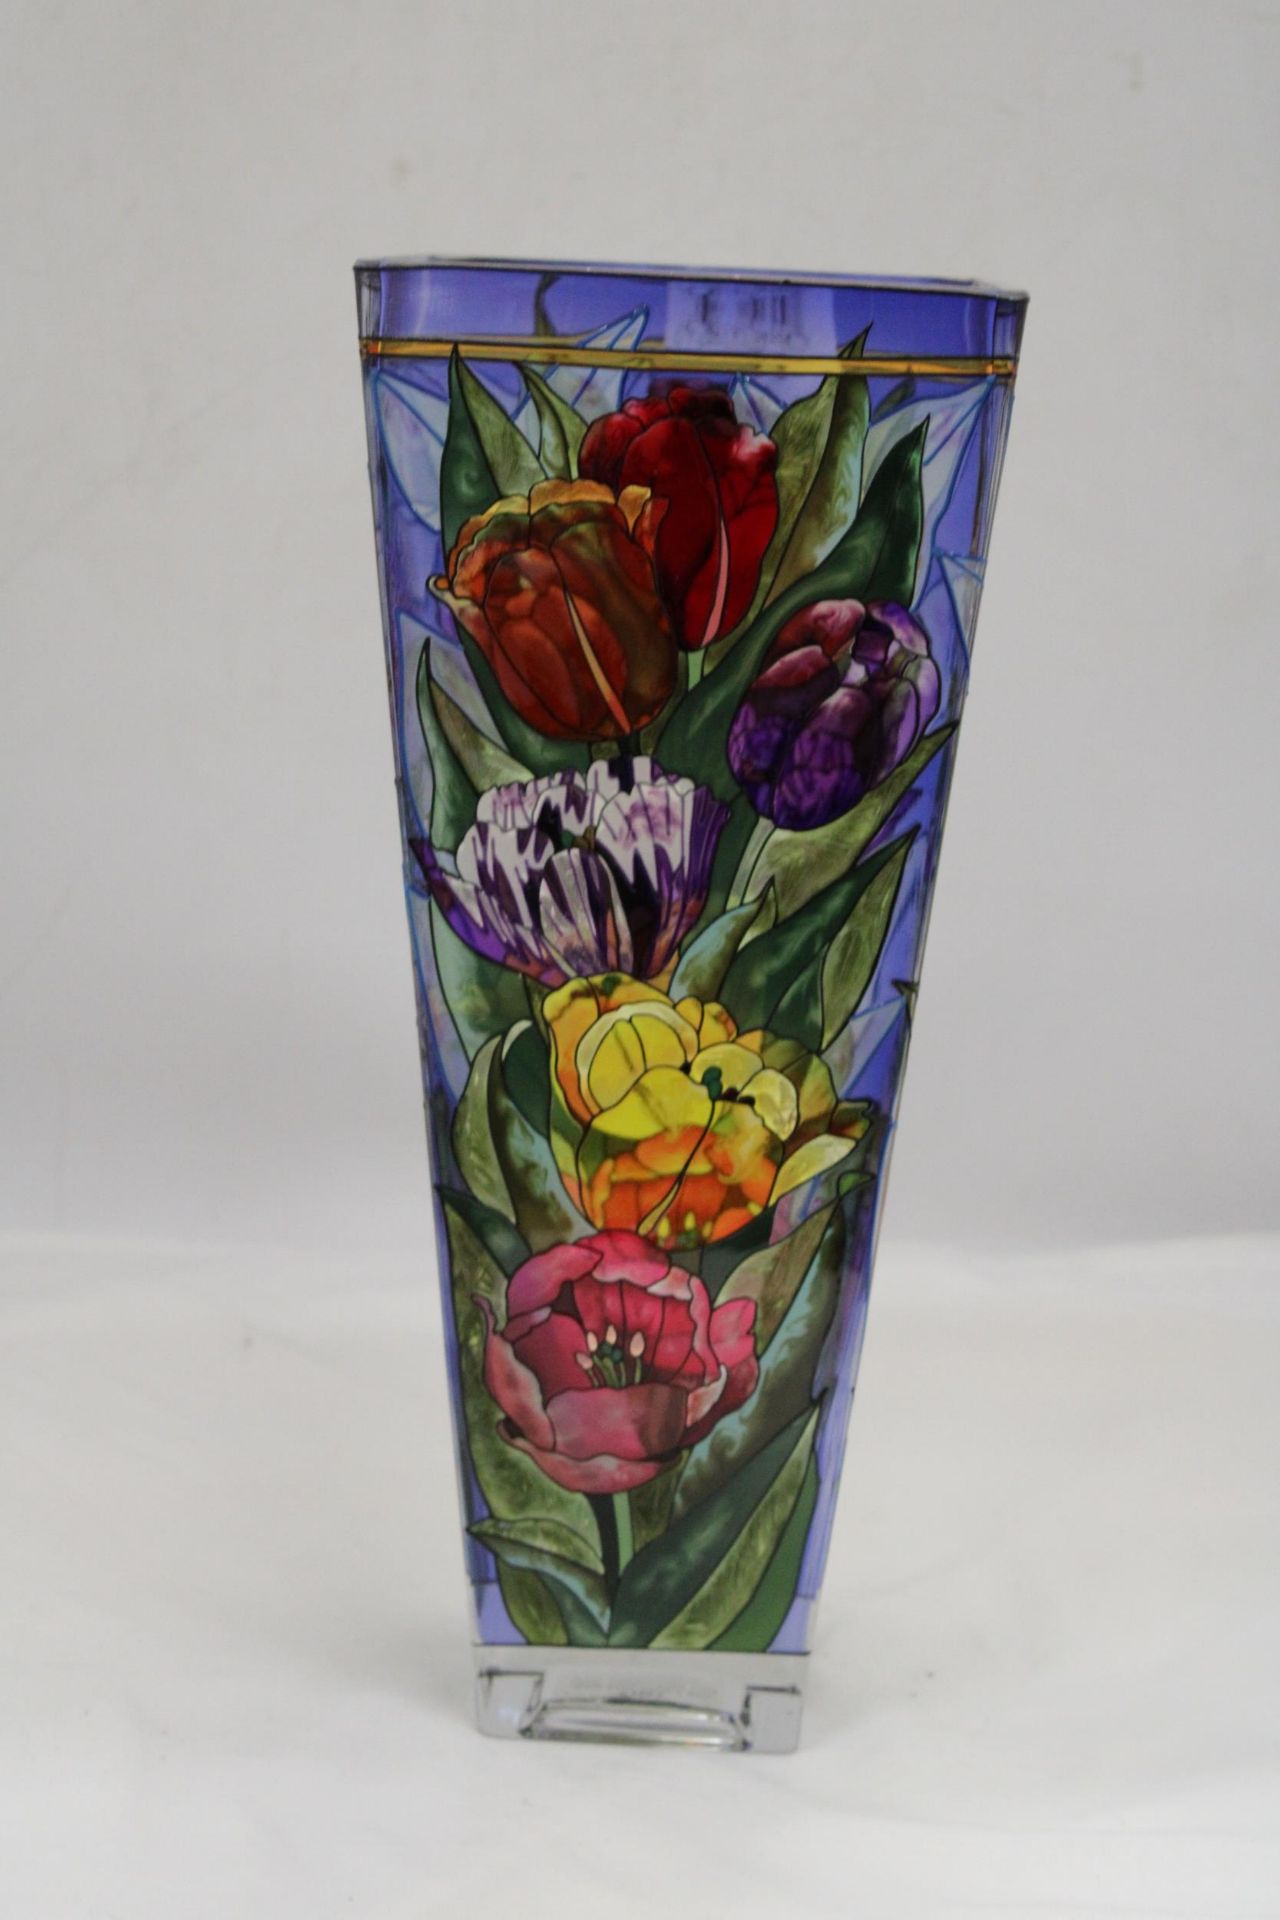 A LARGE HANDPAINTED GLASS VASE, HEIGHT 34CM - Image 2 of 6